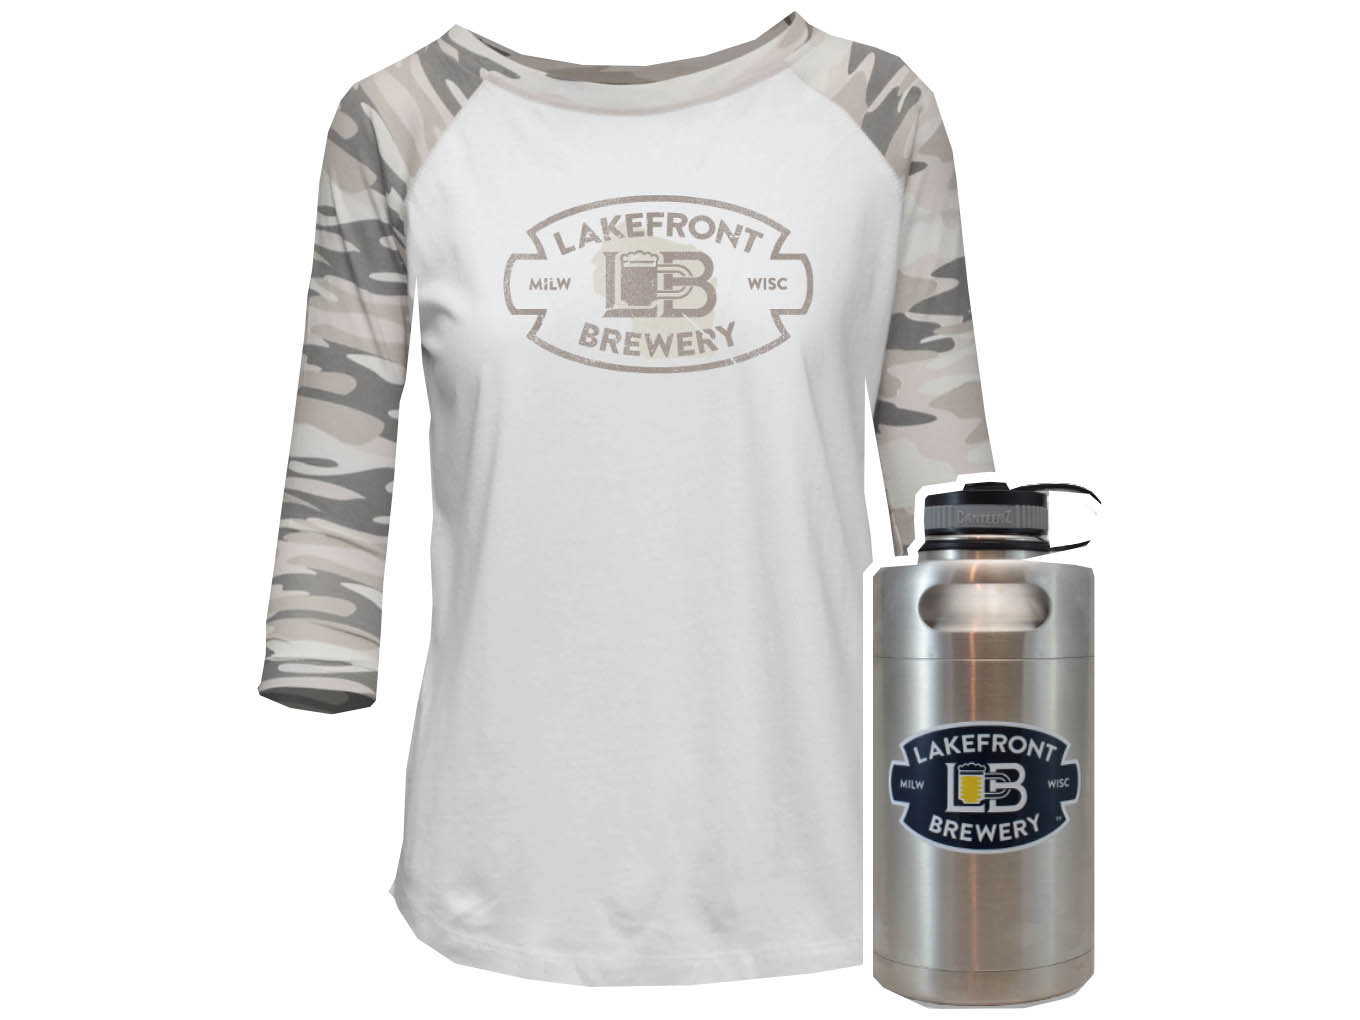 Shop online for cool merch to help local businesses weather the storm